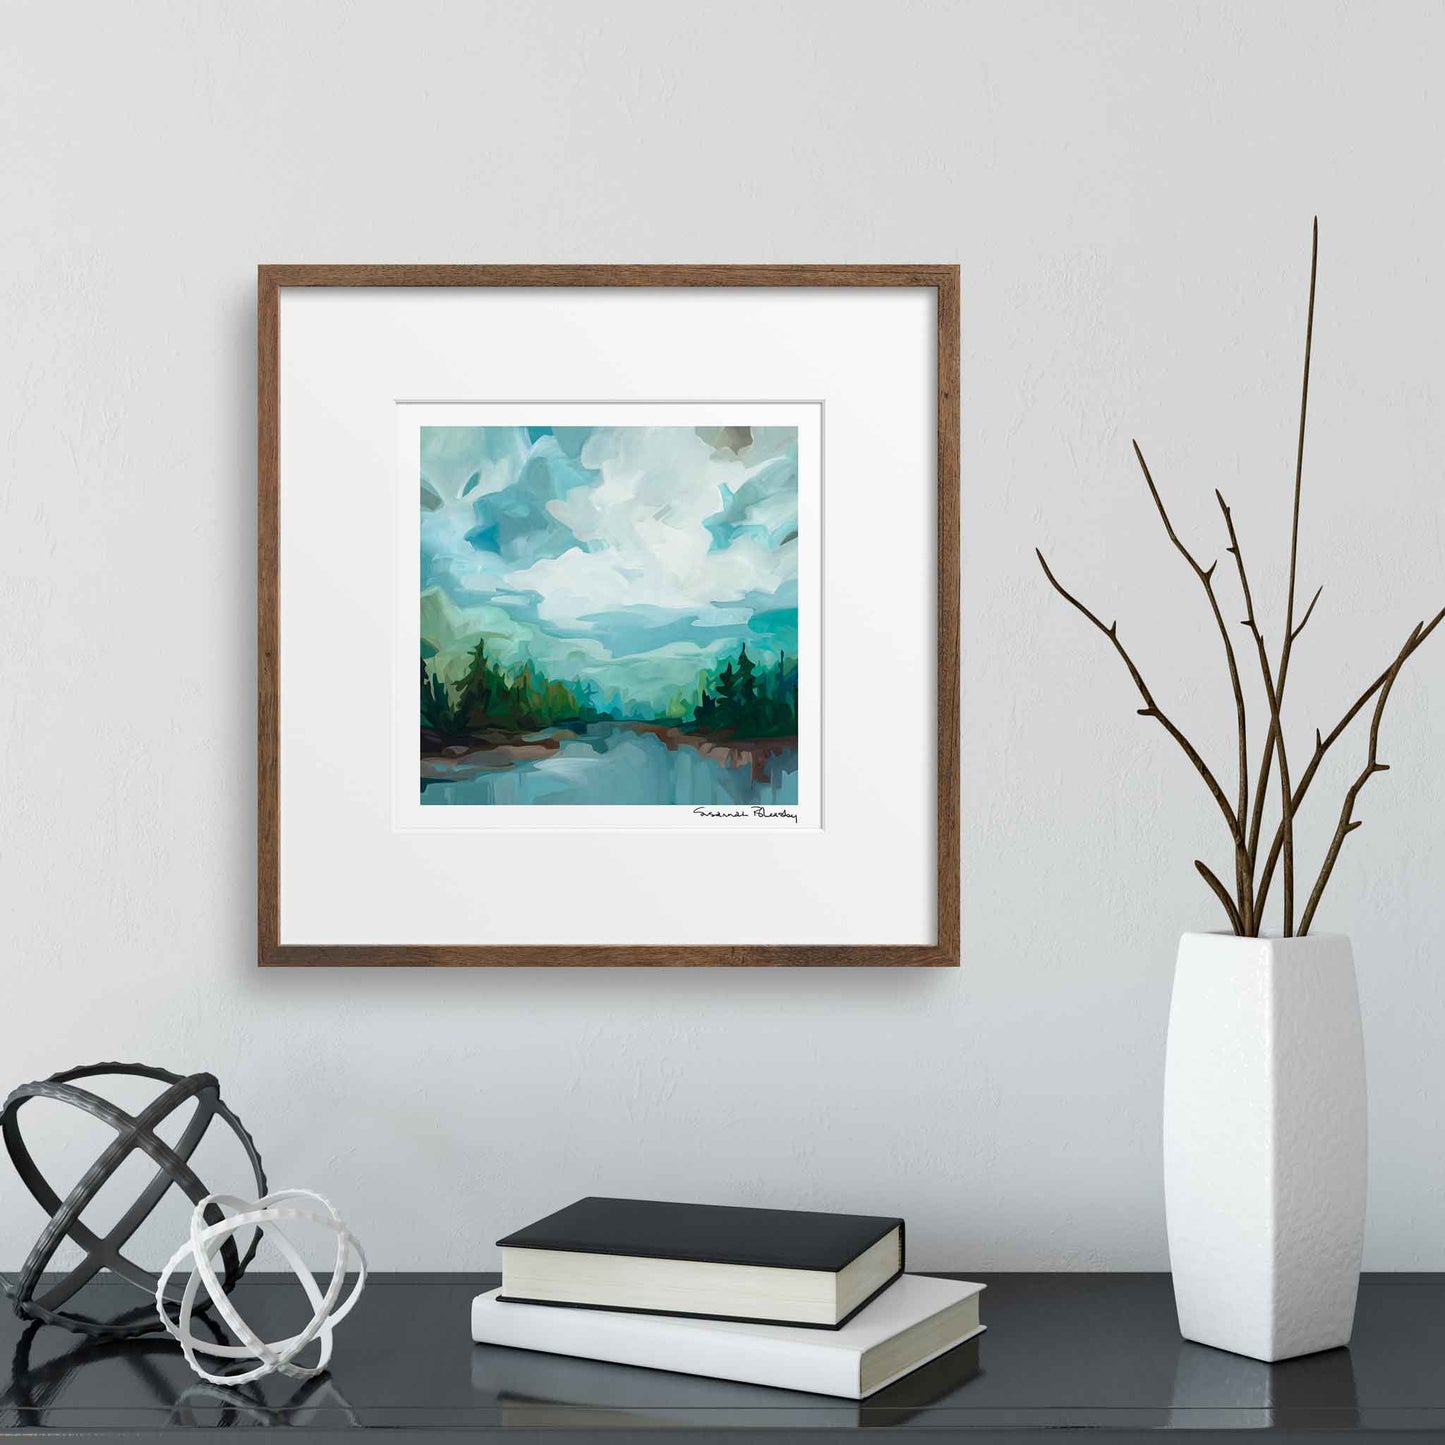 Fine art print of lake scene painting hanging over console table by Canadian abstract artist Susannah Bleasby